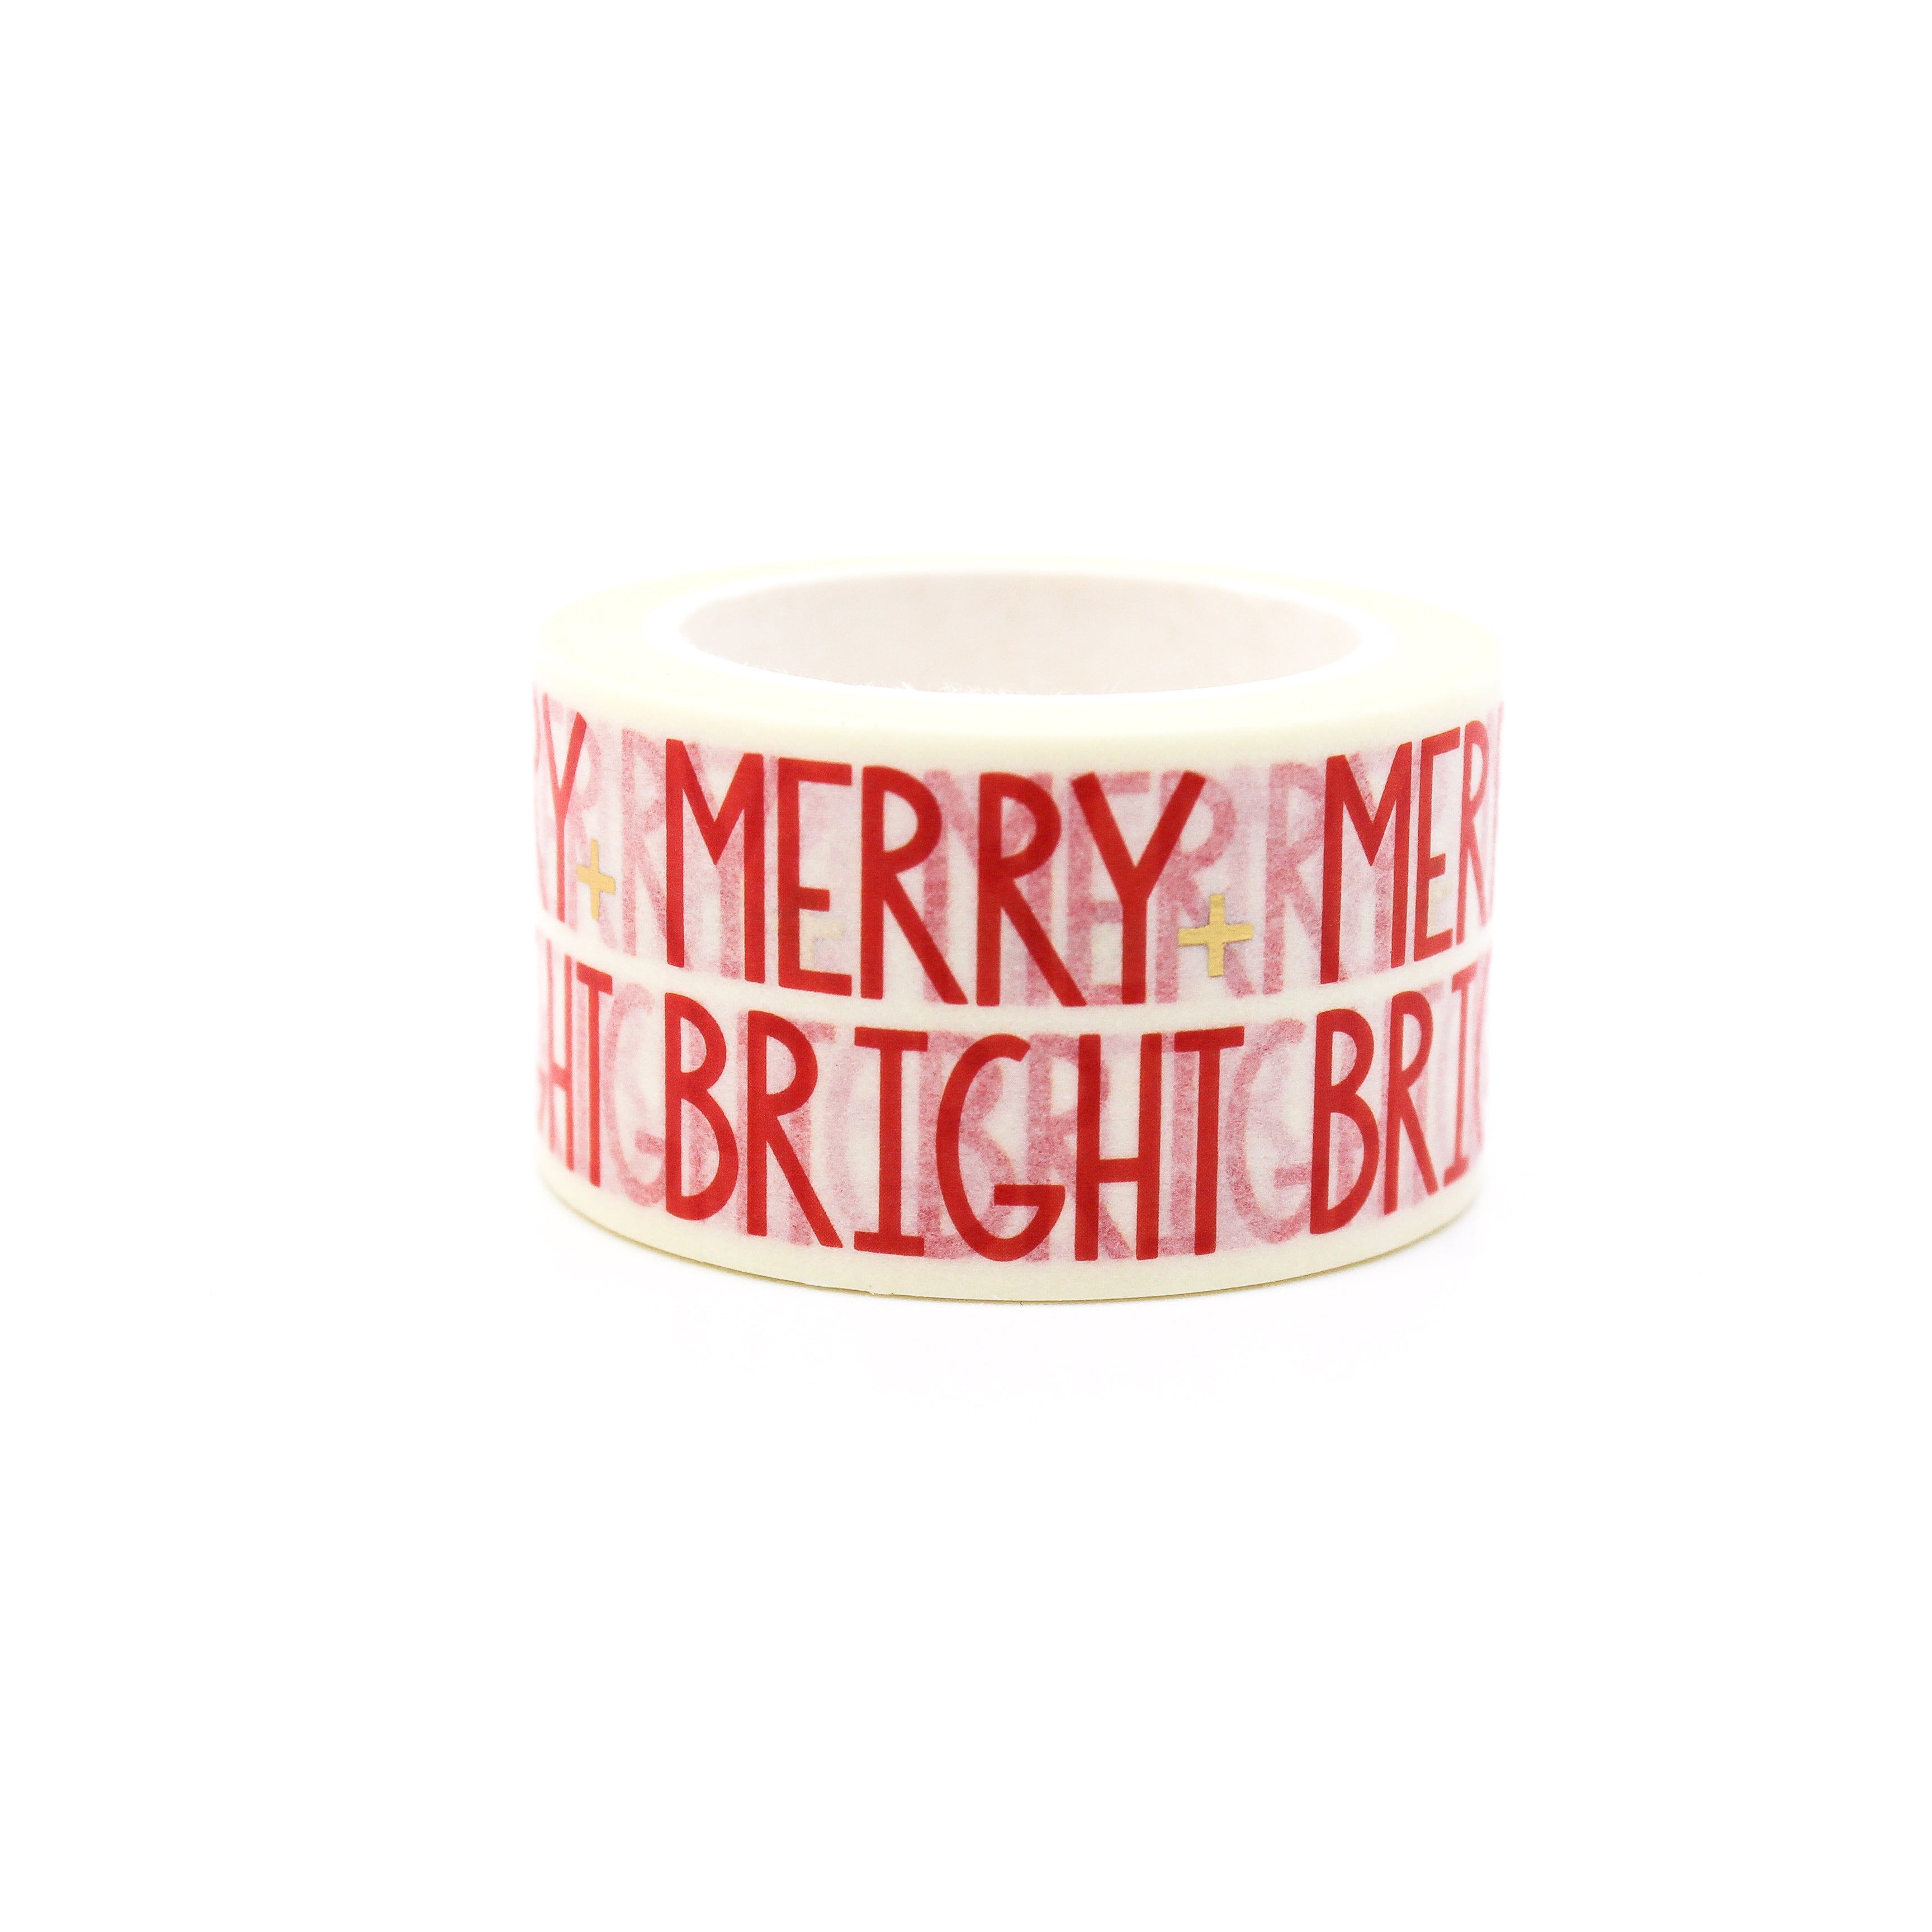 This is a greeting of merry and bright pattern washi tape from BBB Supplies Craft Shop